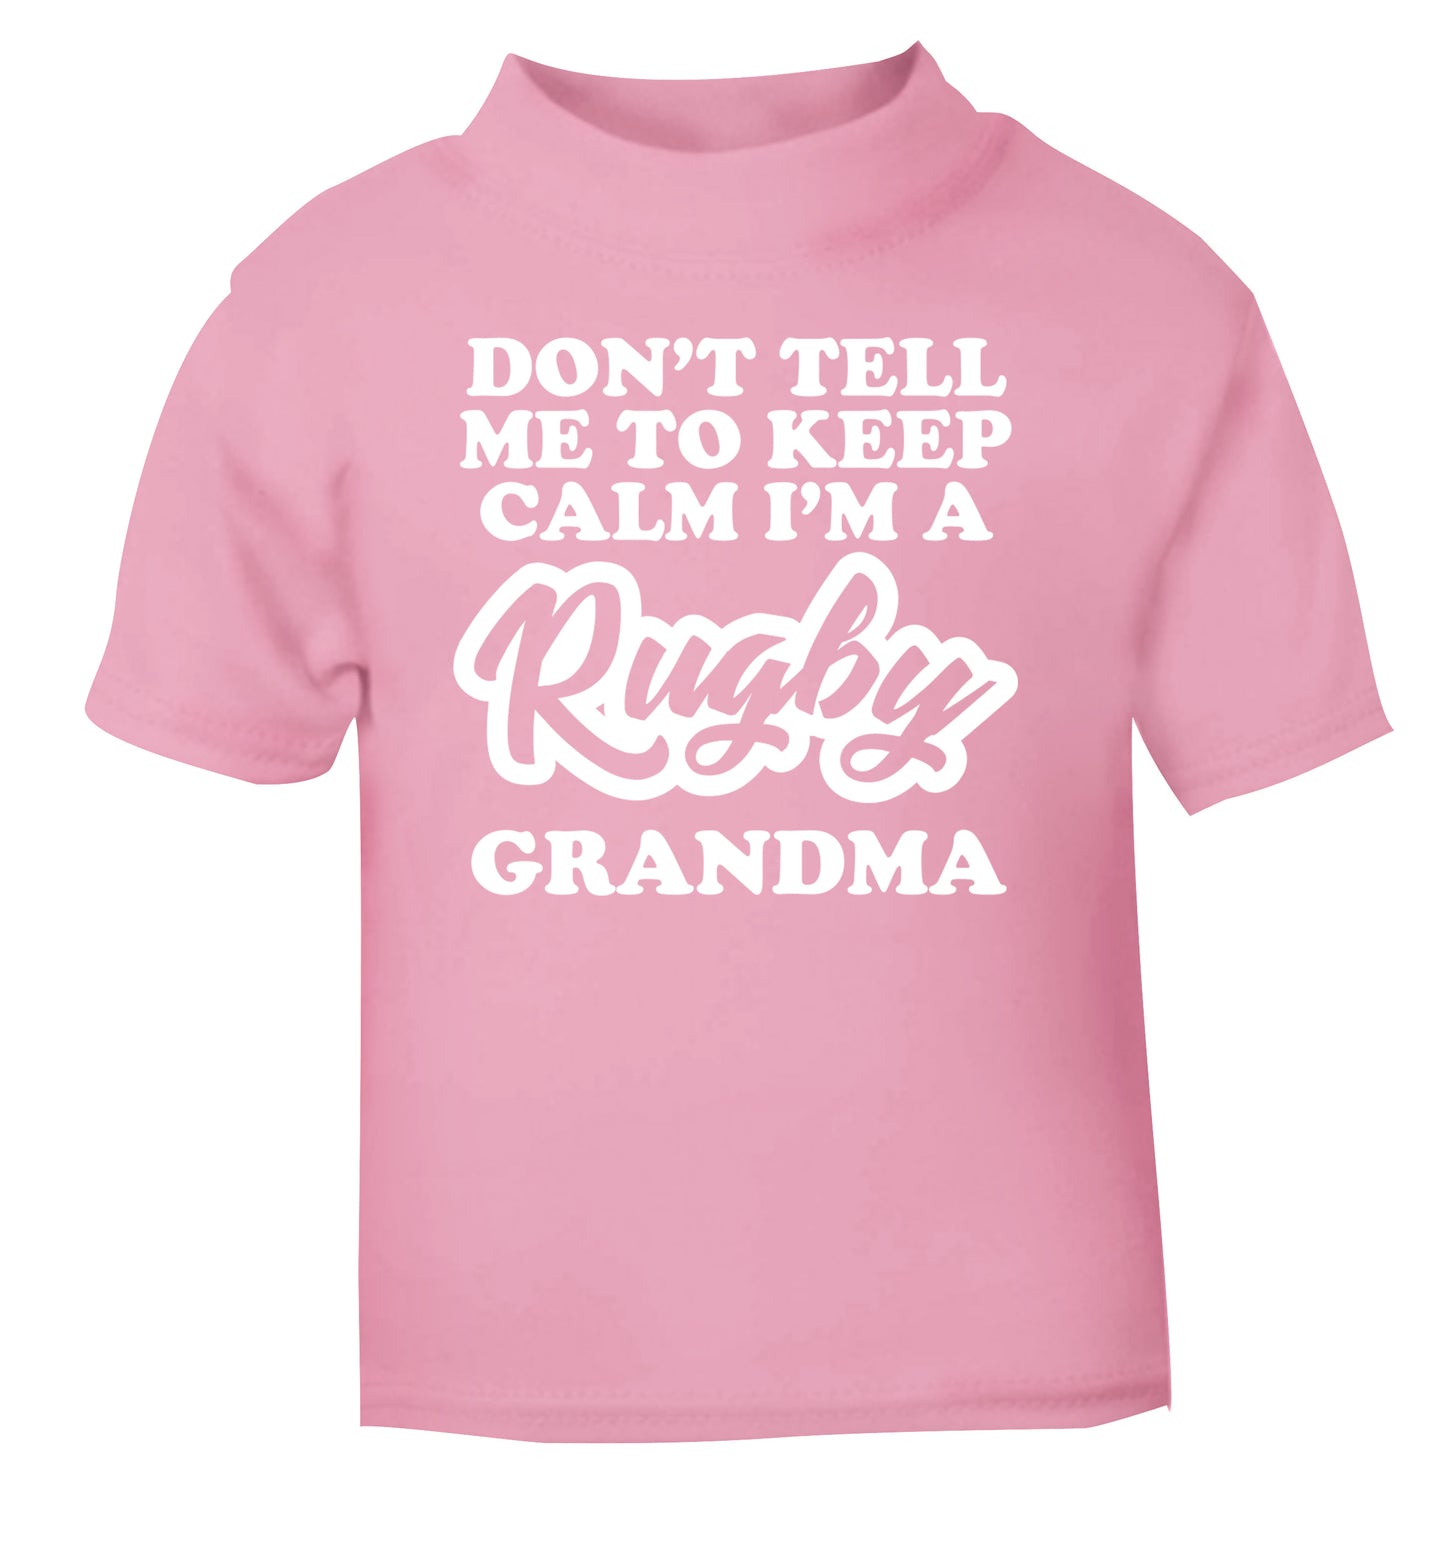 Don't tell me to keep calm I'm a rugby grandma light pink Baby Toddler Tshirt 2 Years